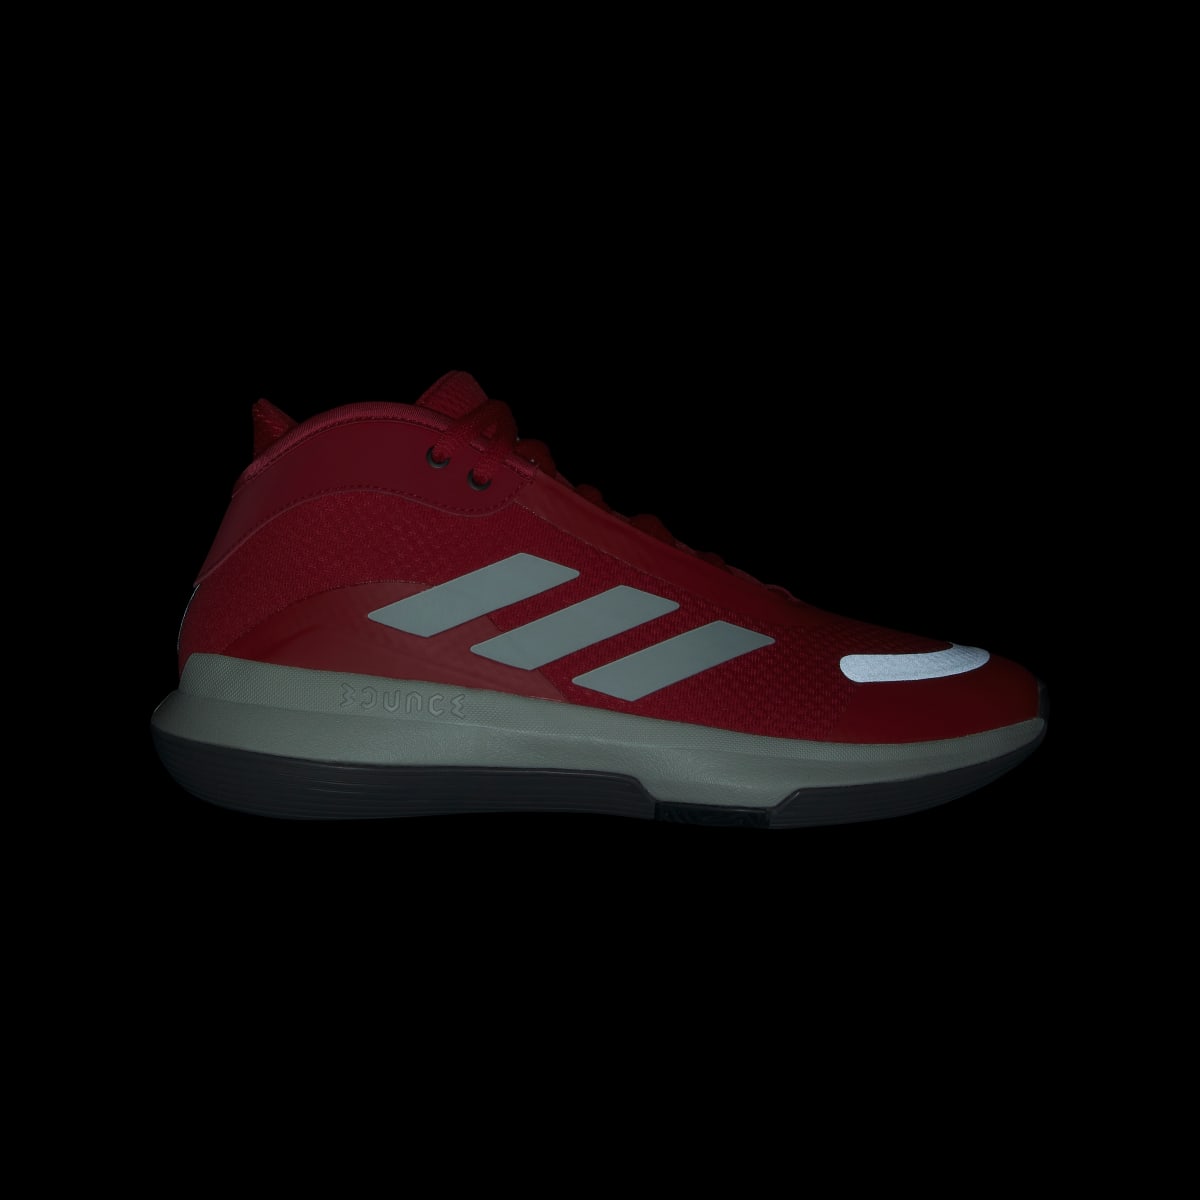 Adidas Bounce Legends Low Basketball Shoes. 4